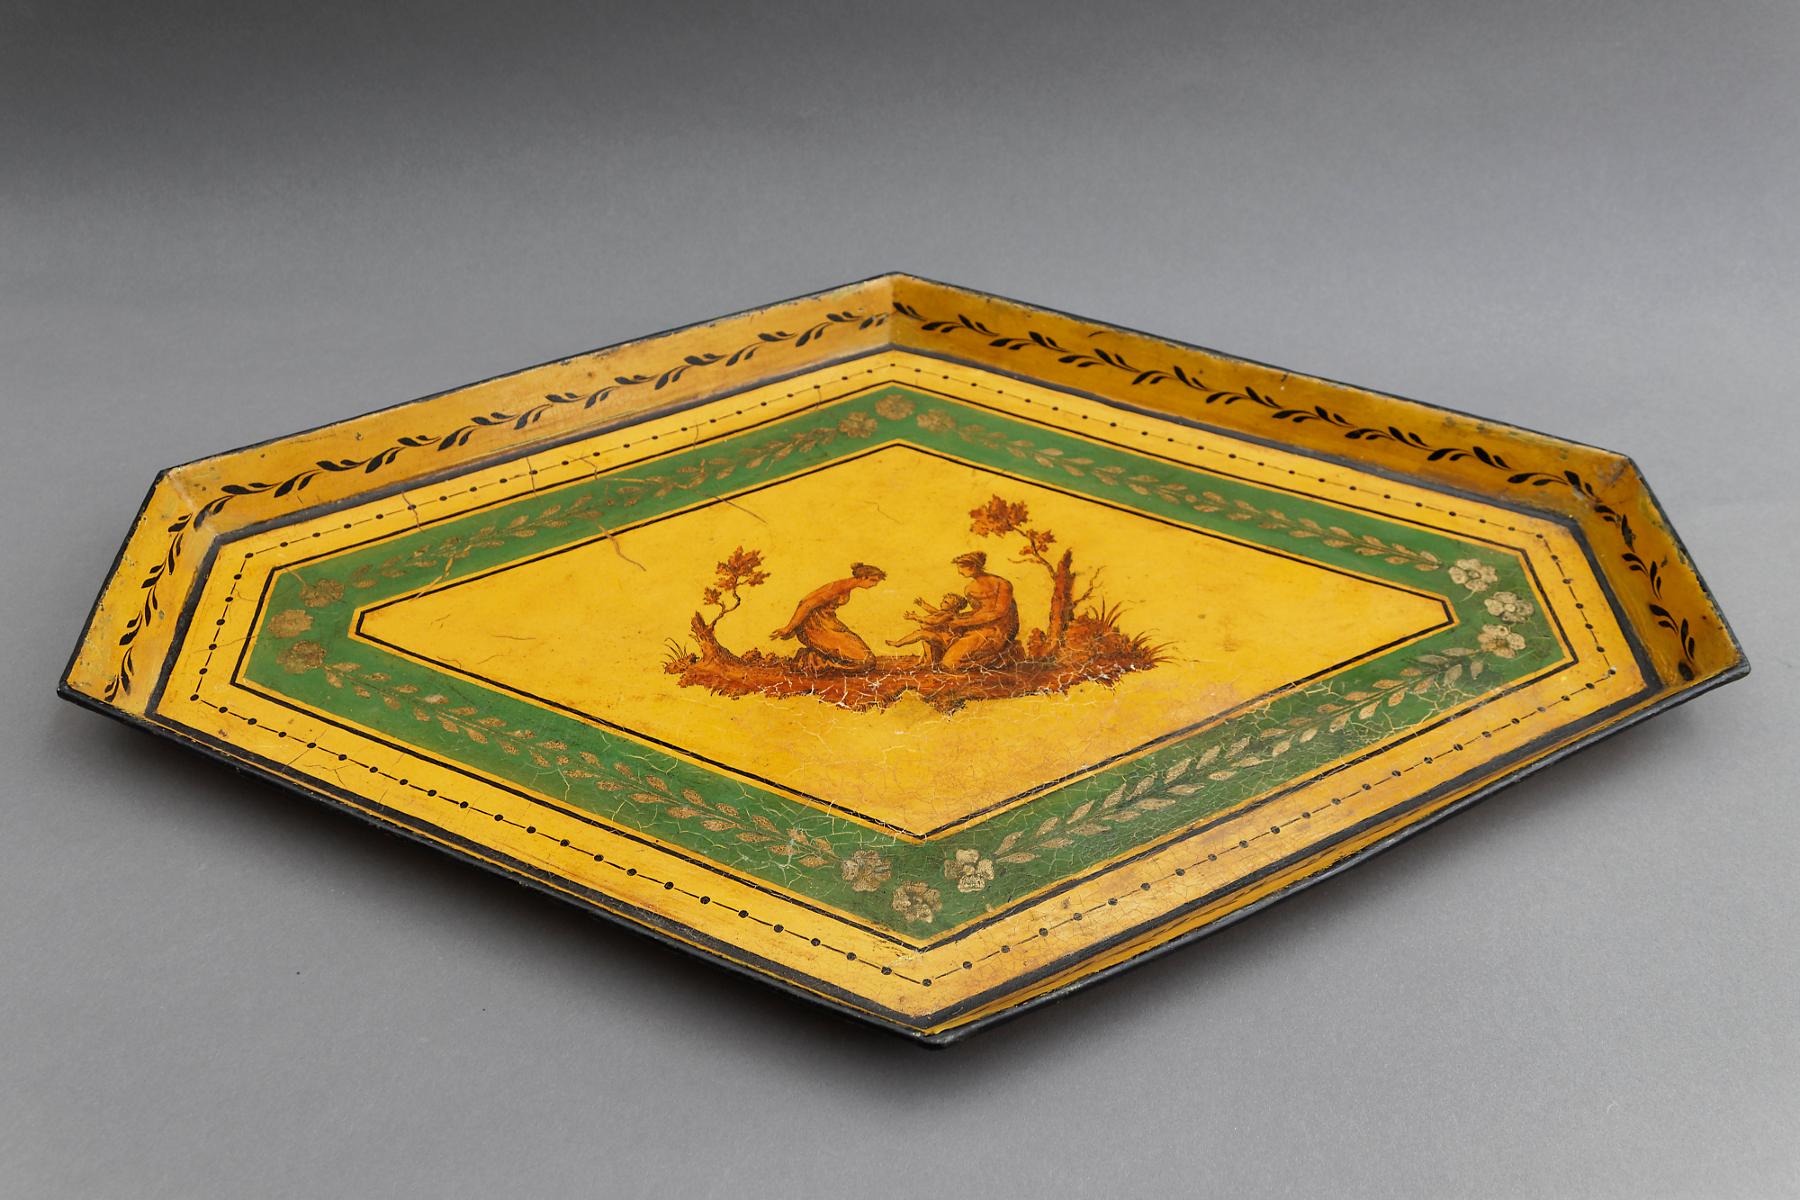 A fine and decorative polychrome painted and gilt decorated hexagonal metal tray in neoclassical style. In the centre against a yellow background two women with a child between trees. This one is fantastic and could be hung on the wall as art.